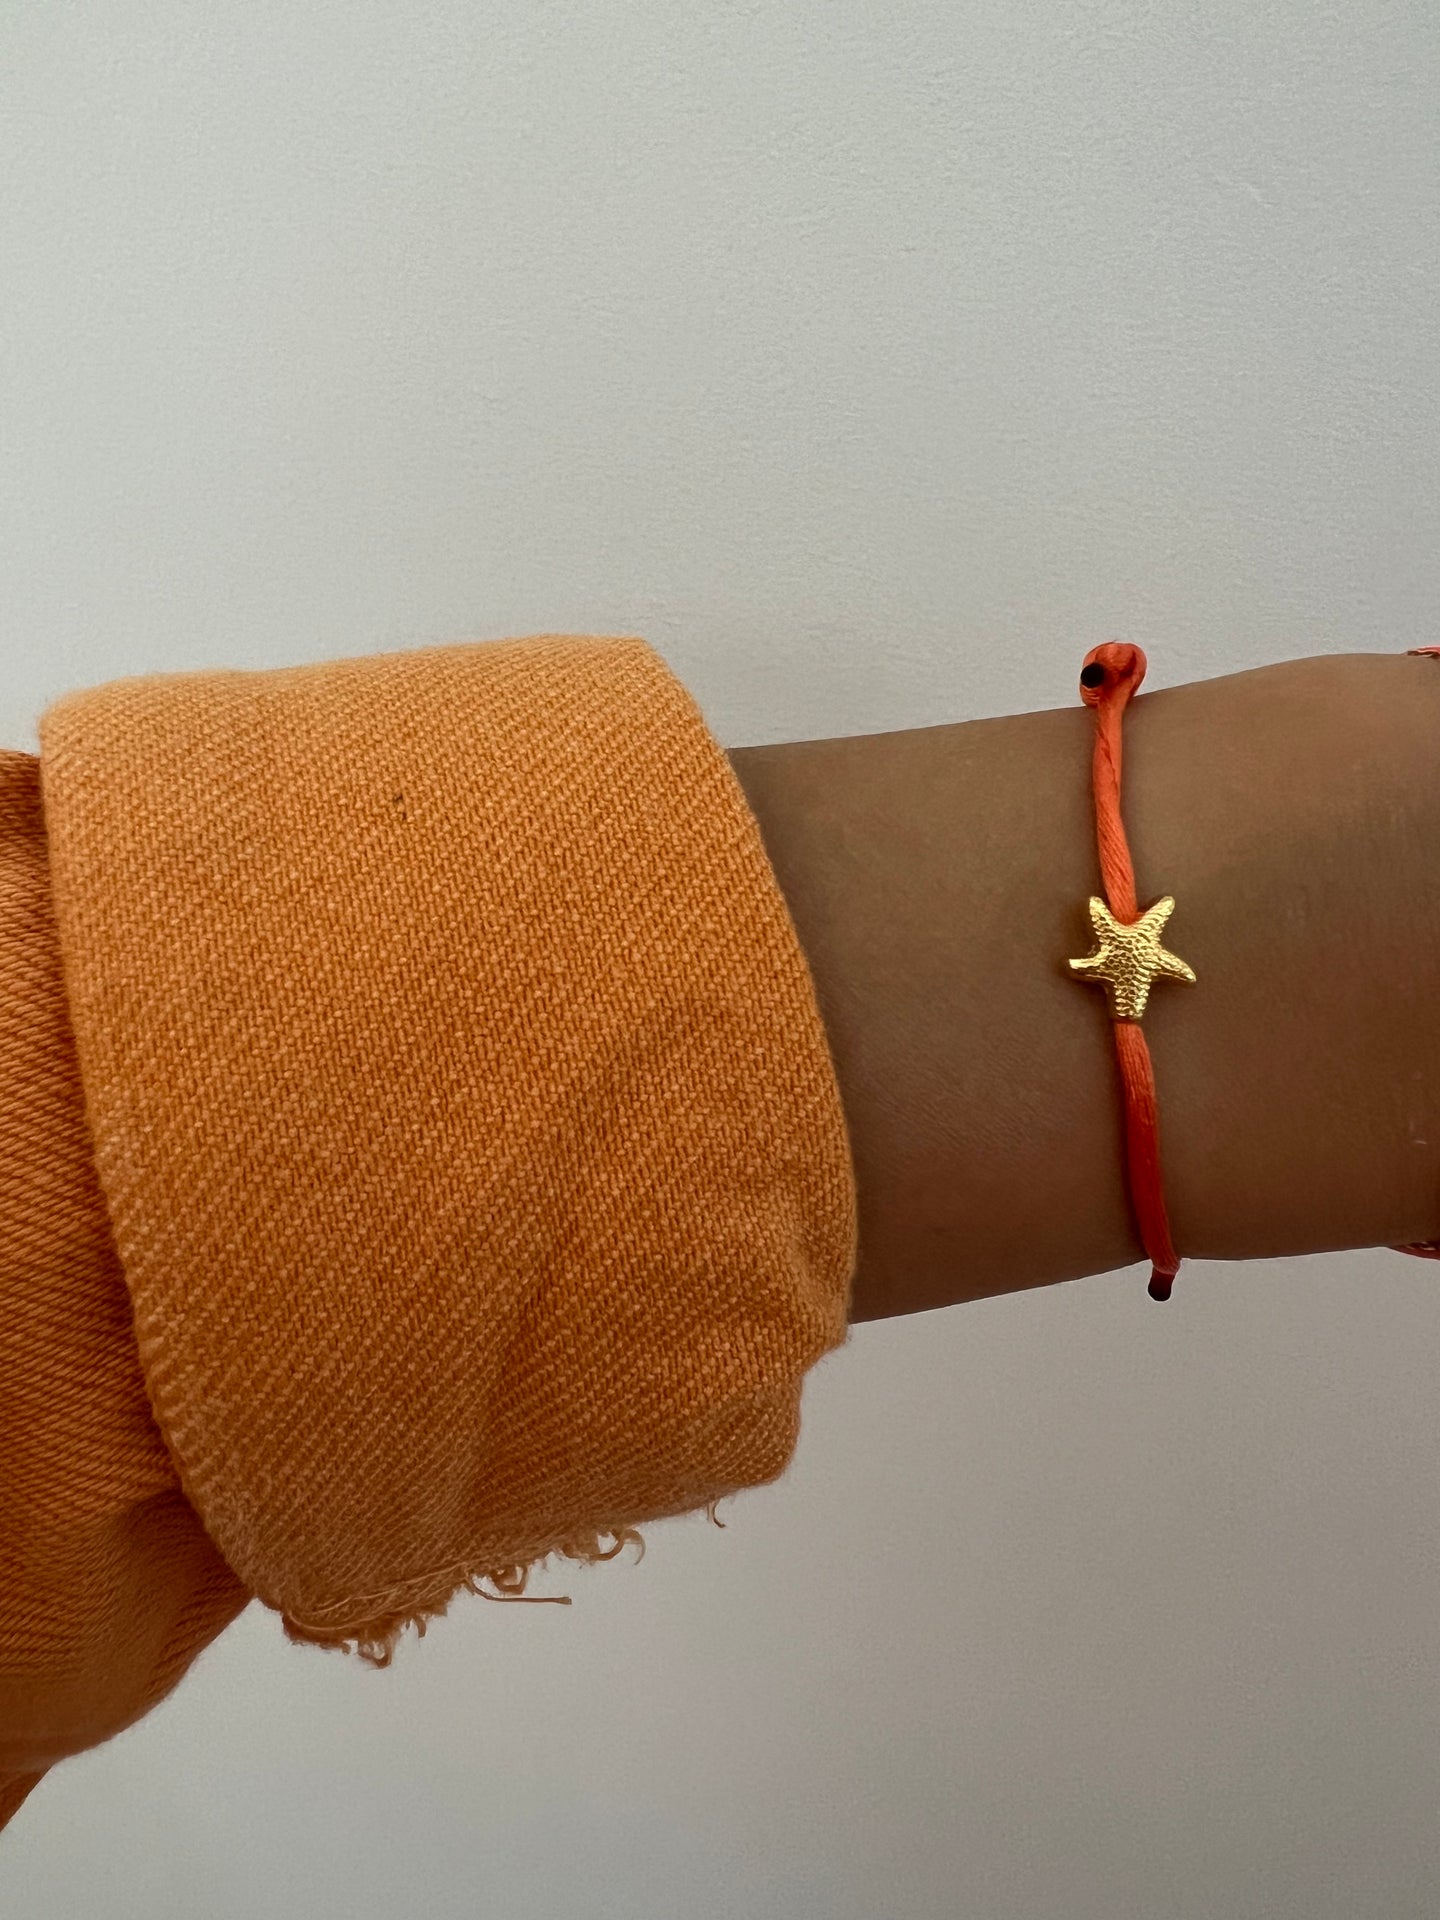 Seestern  Armband   - BY SARA BECKER - THE LABEL